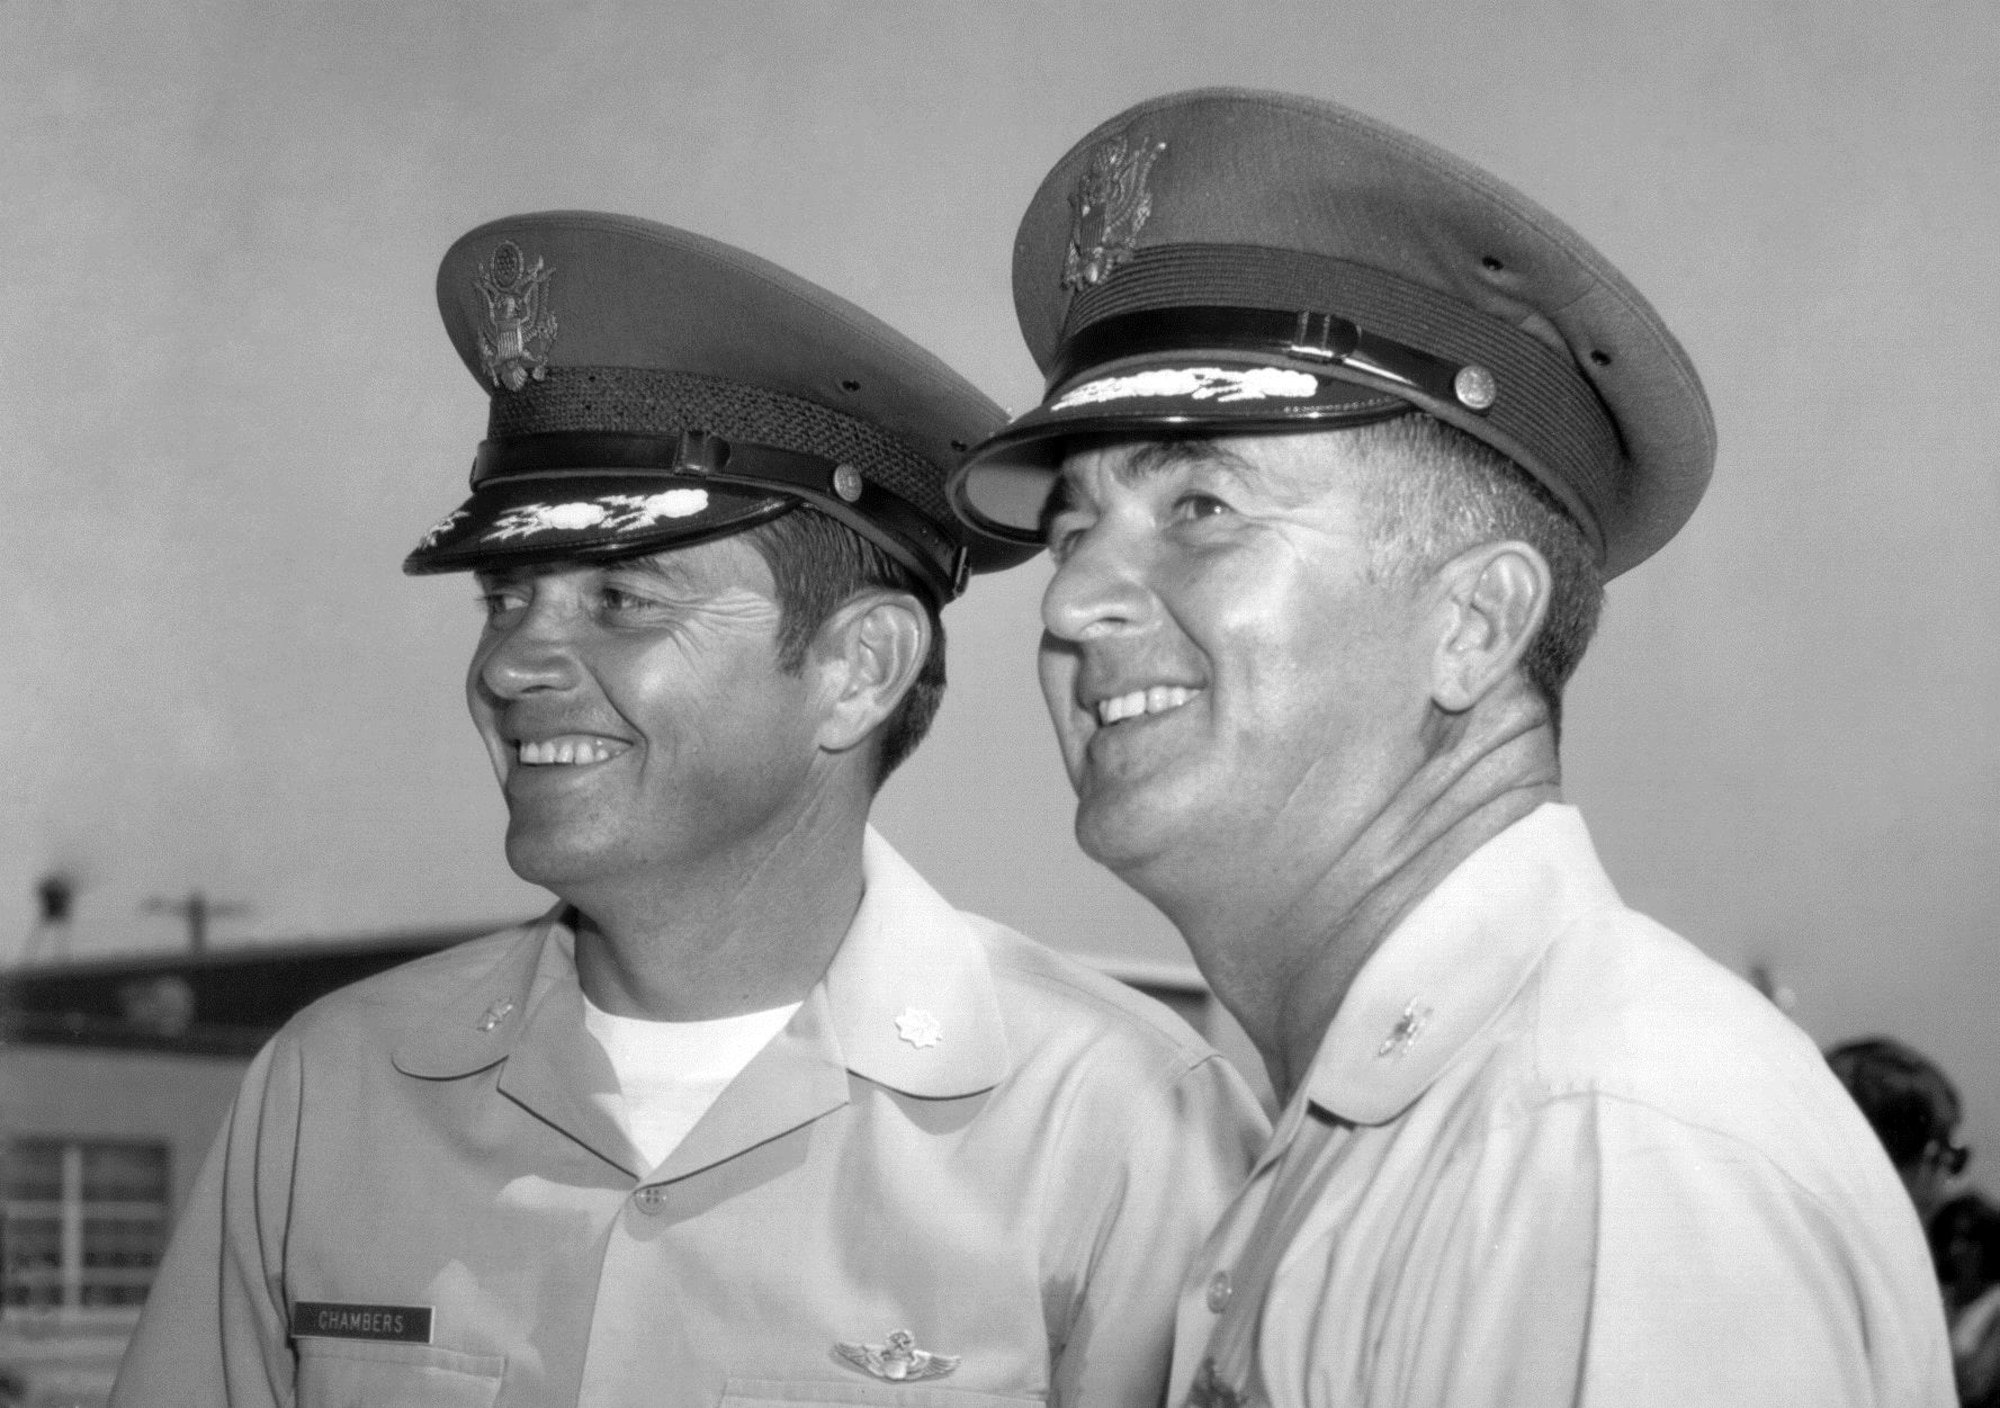 Maj. Gen. Donald E. Morris (right) pictured here when he was a colonel and the commander of the Tucson unit. Maj. Gen. Wess P. Chambers (left) was Morris’ vice commander and later served as the group’s second commander. (U.S. Air National Guard photo)